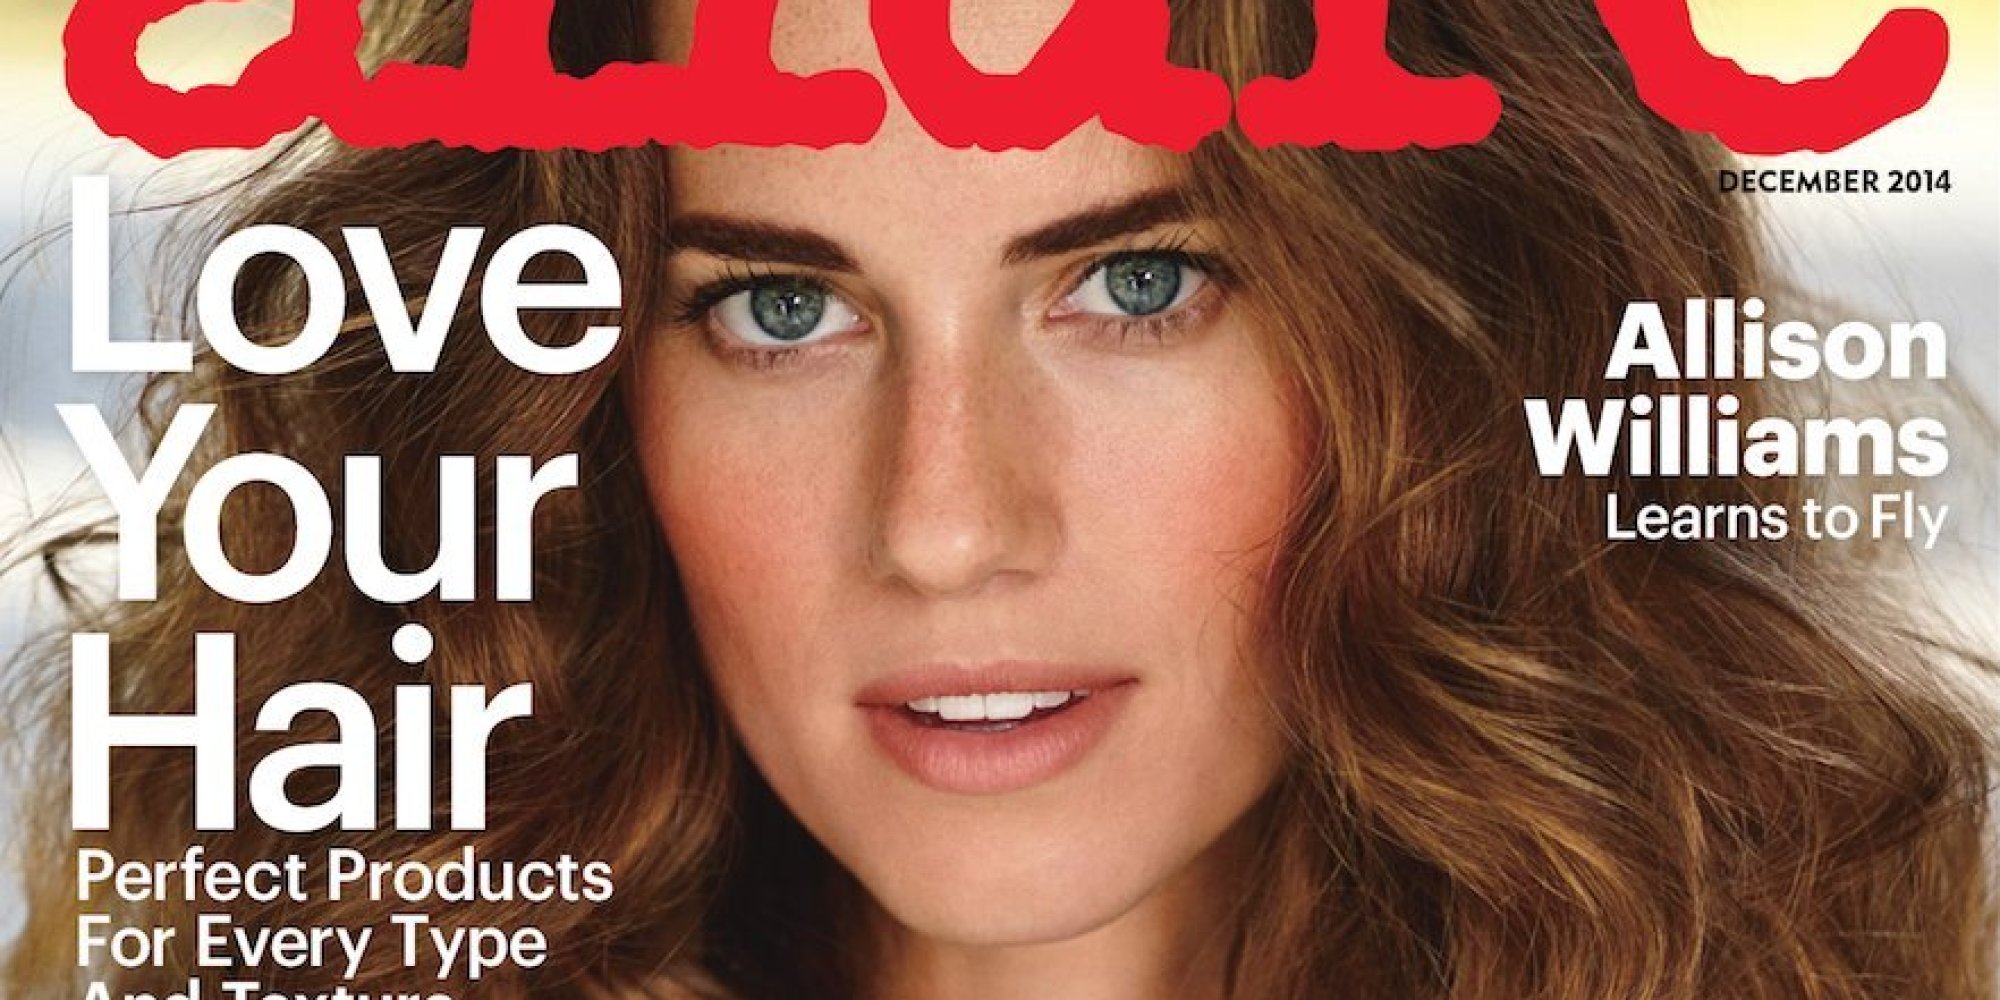 Allison Williams Gets Real About Her Weight Loss In Allure Magazine